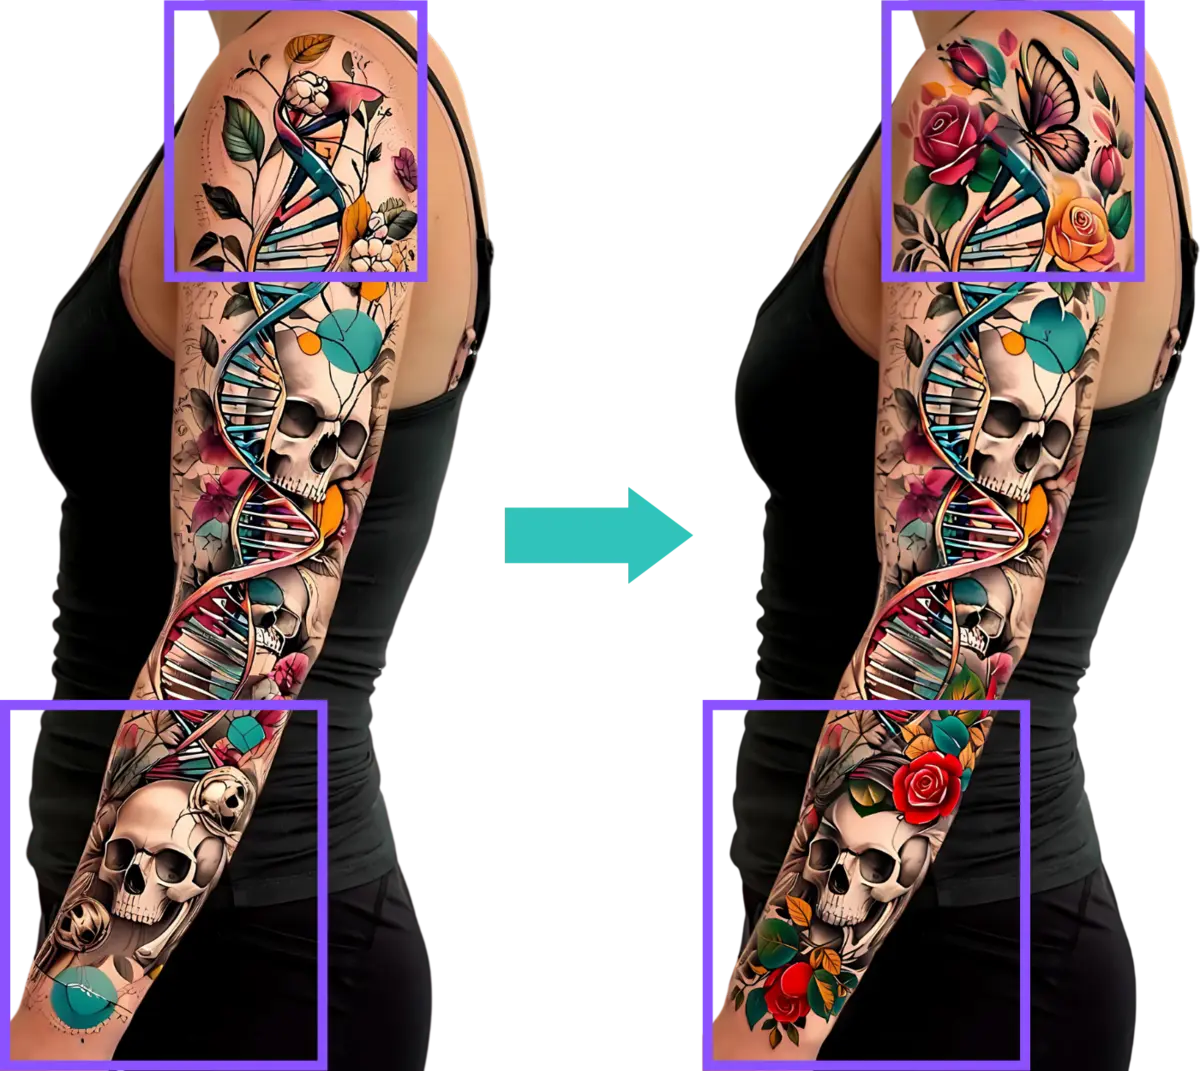 Sketch and generate tattoo designs directly on you with Inkdrop.